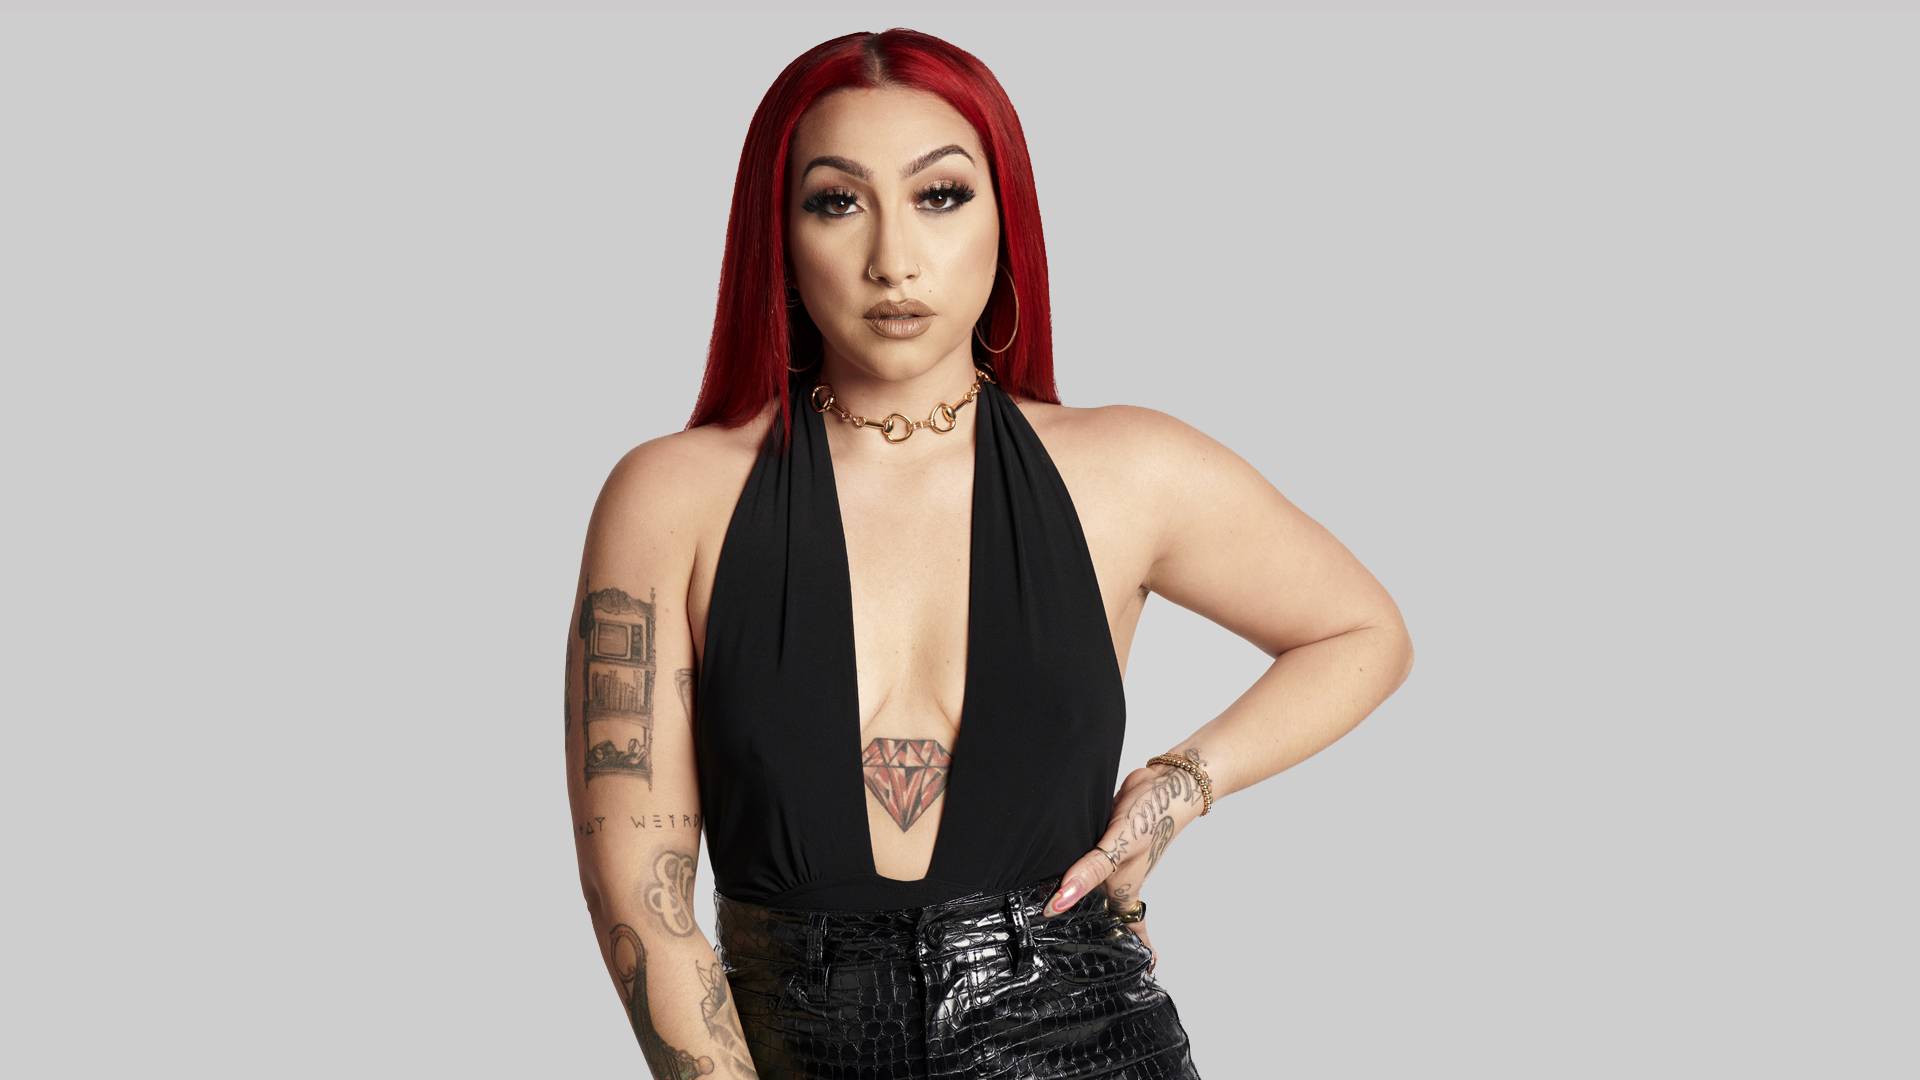 Black Ink Crew: Chicago: VH1 Series Renewed, Returning This Month -  canceled + renewed TV shows, ratings - TV Series Finale